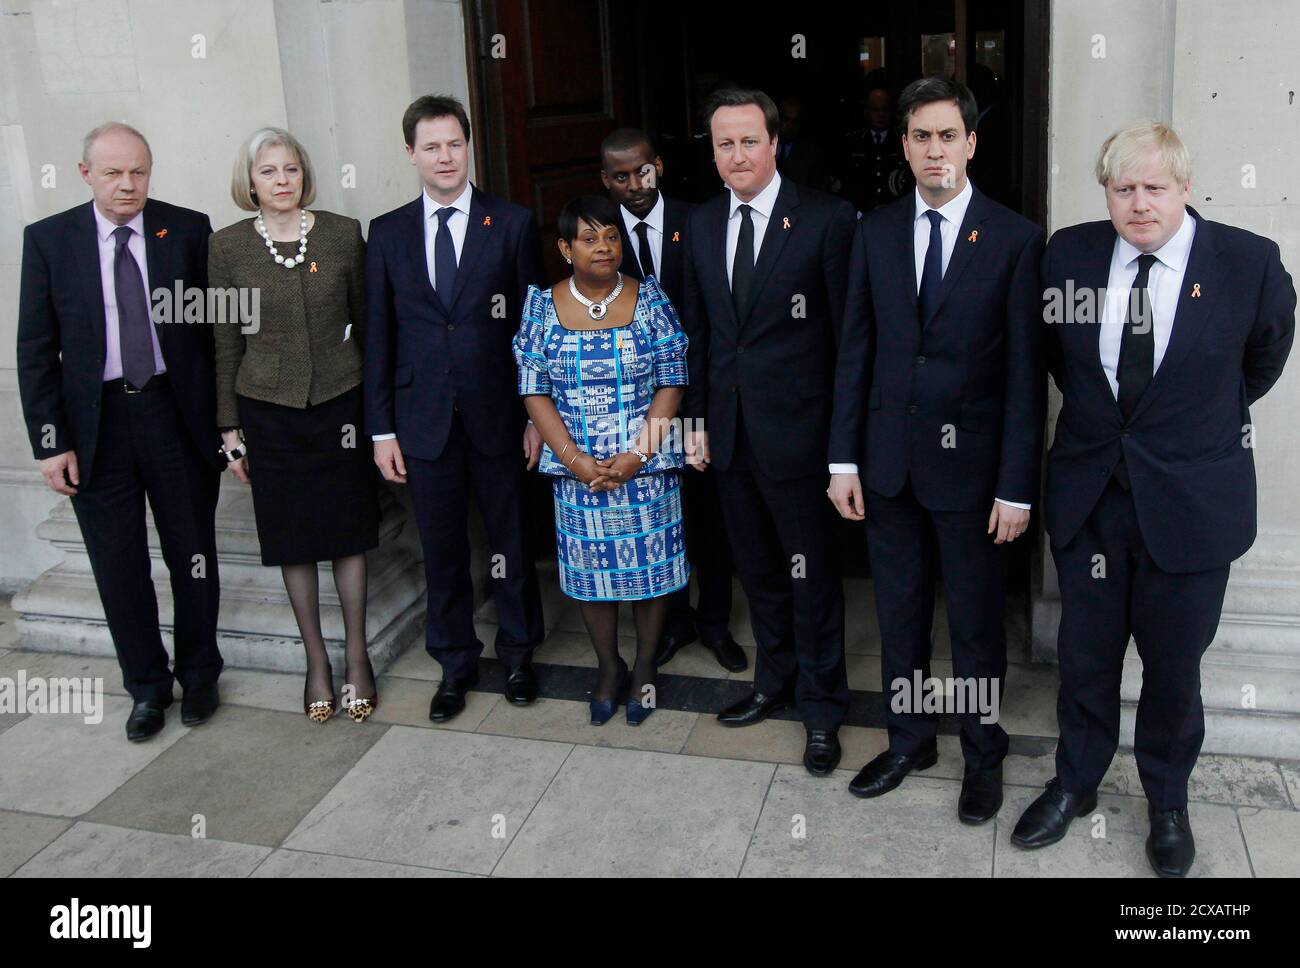 The mother of murdered teenager Stephen Lawrence, Doreen Lawrence, poses for a photograph with (L-R) Minister for Policing and Criminal Justice, Damian Green, Home Secretary Theresa May, Deputy Prime Minister Nick Clegg, Doreen Lawrence, Stephen's brother Stuart, Britain's Prime Minister David Cameron, Labour Party Leader Ed Milliband and London Mayor Boris Johnson after a service to mark the 20th anniversary of Stephen's death, at St Martin-in-the-Fields church in London April 22, 2013.    REUTERS/Luke MacGregor  (BRITAIN - Tags: CRIME LAW POLITICS SOCIETY RELIGION) Stock Photo